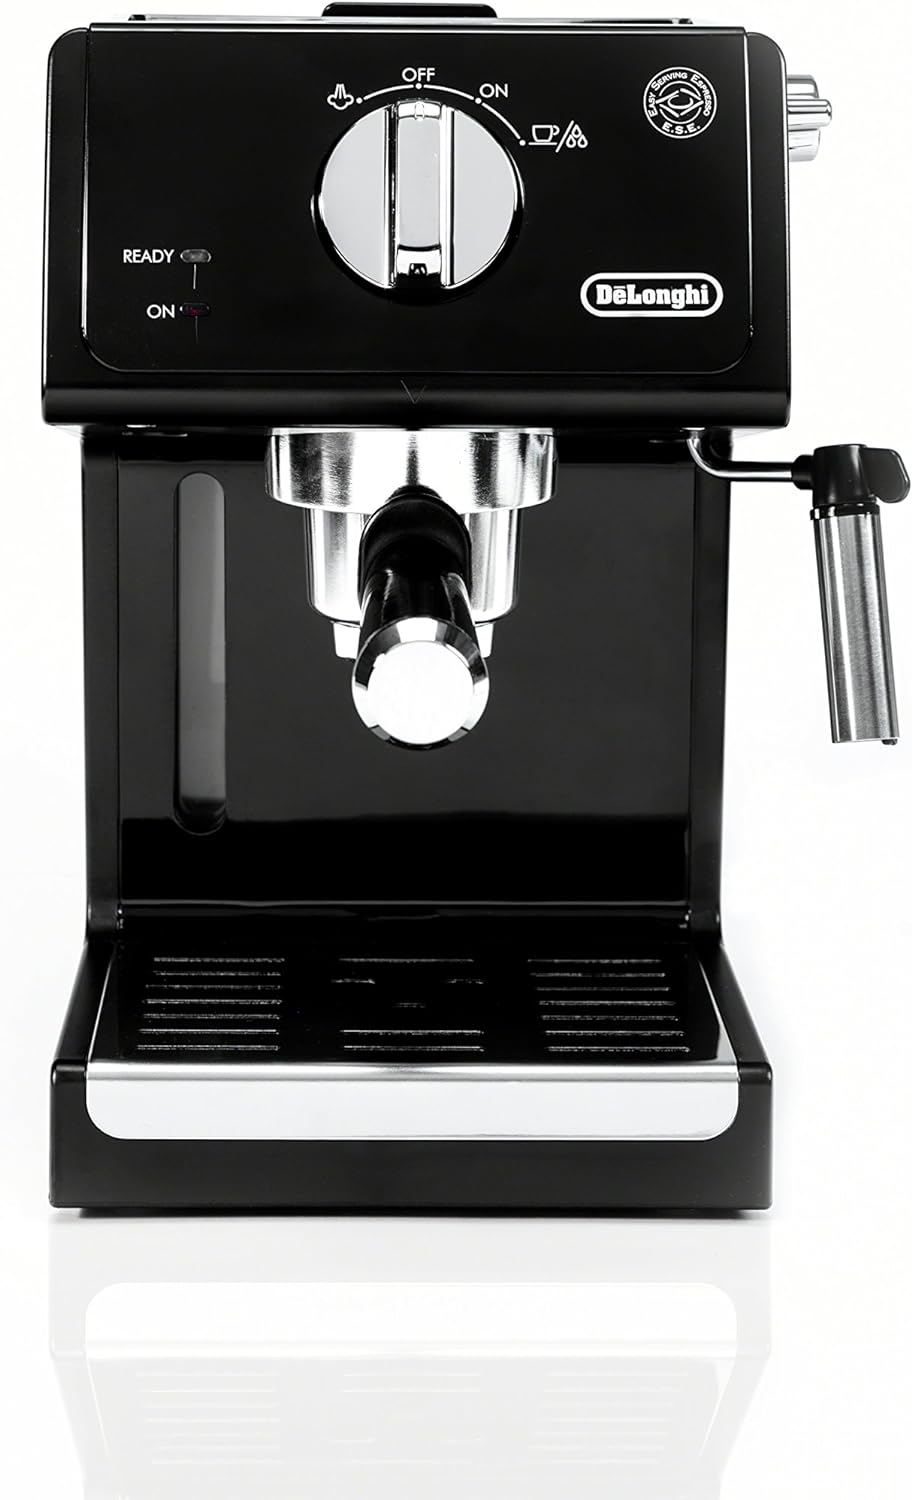 DeLonghi ECP3120 15 Bar Espresso Machine with Advanced Cappuccino System, 9.6 x 7.2 x 11.9 inches, Black/Stainless Steel